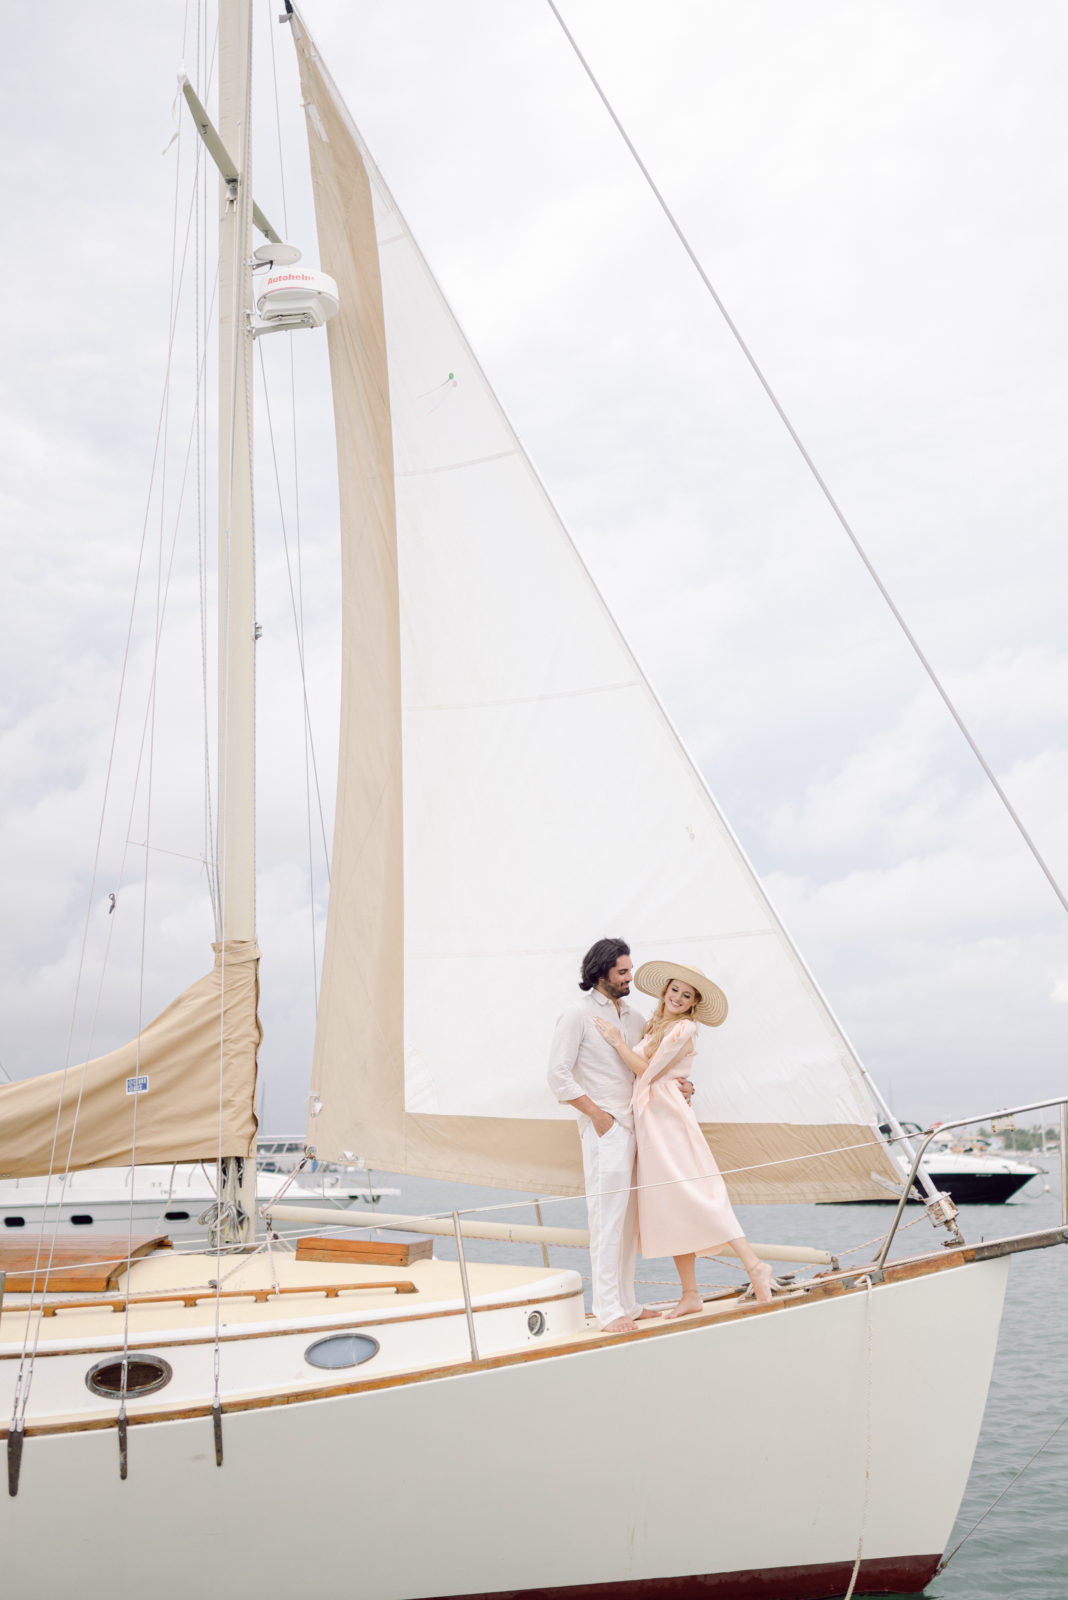 Couple on a sailboat in West Palm Beach